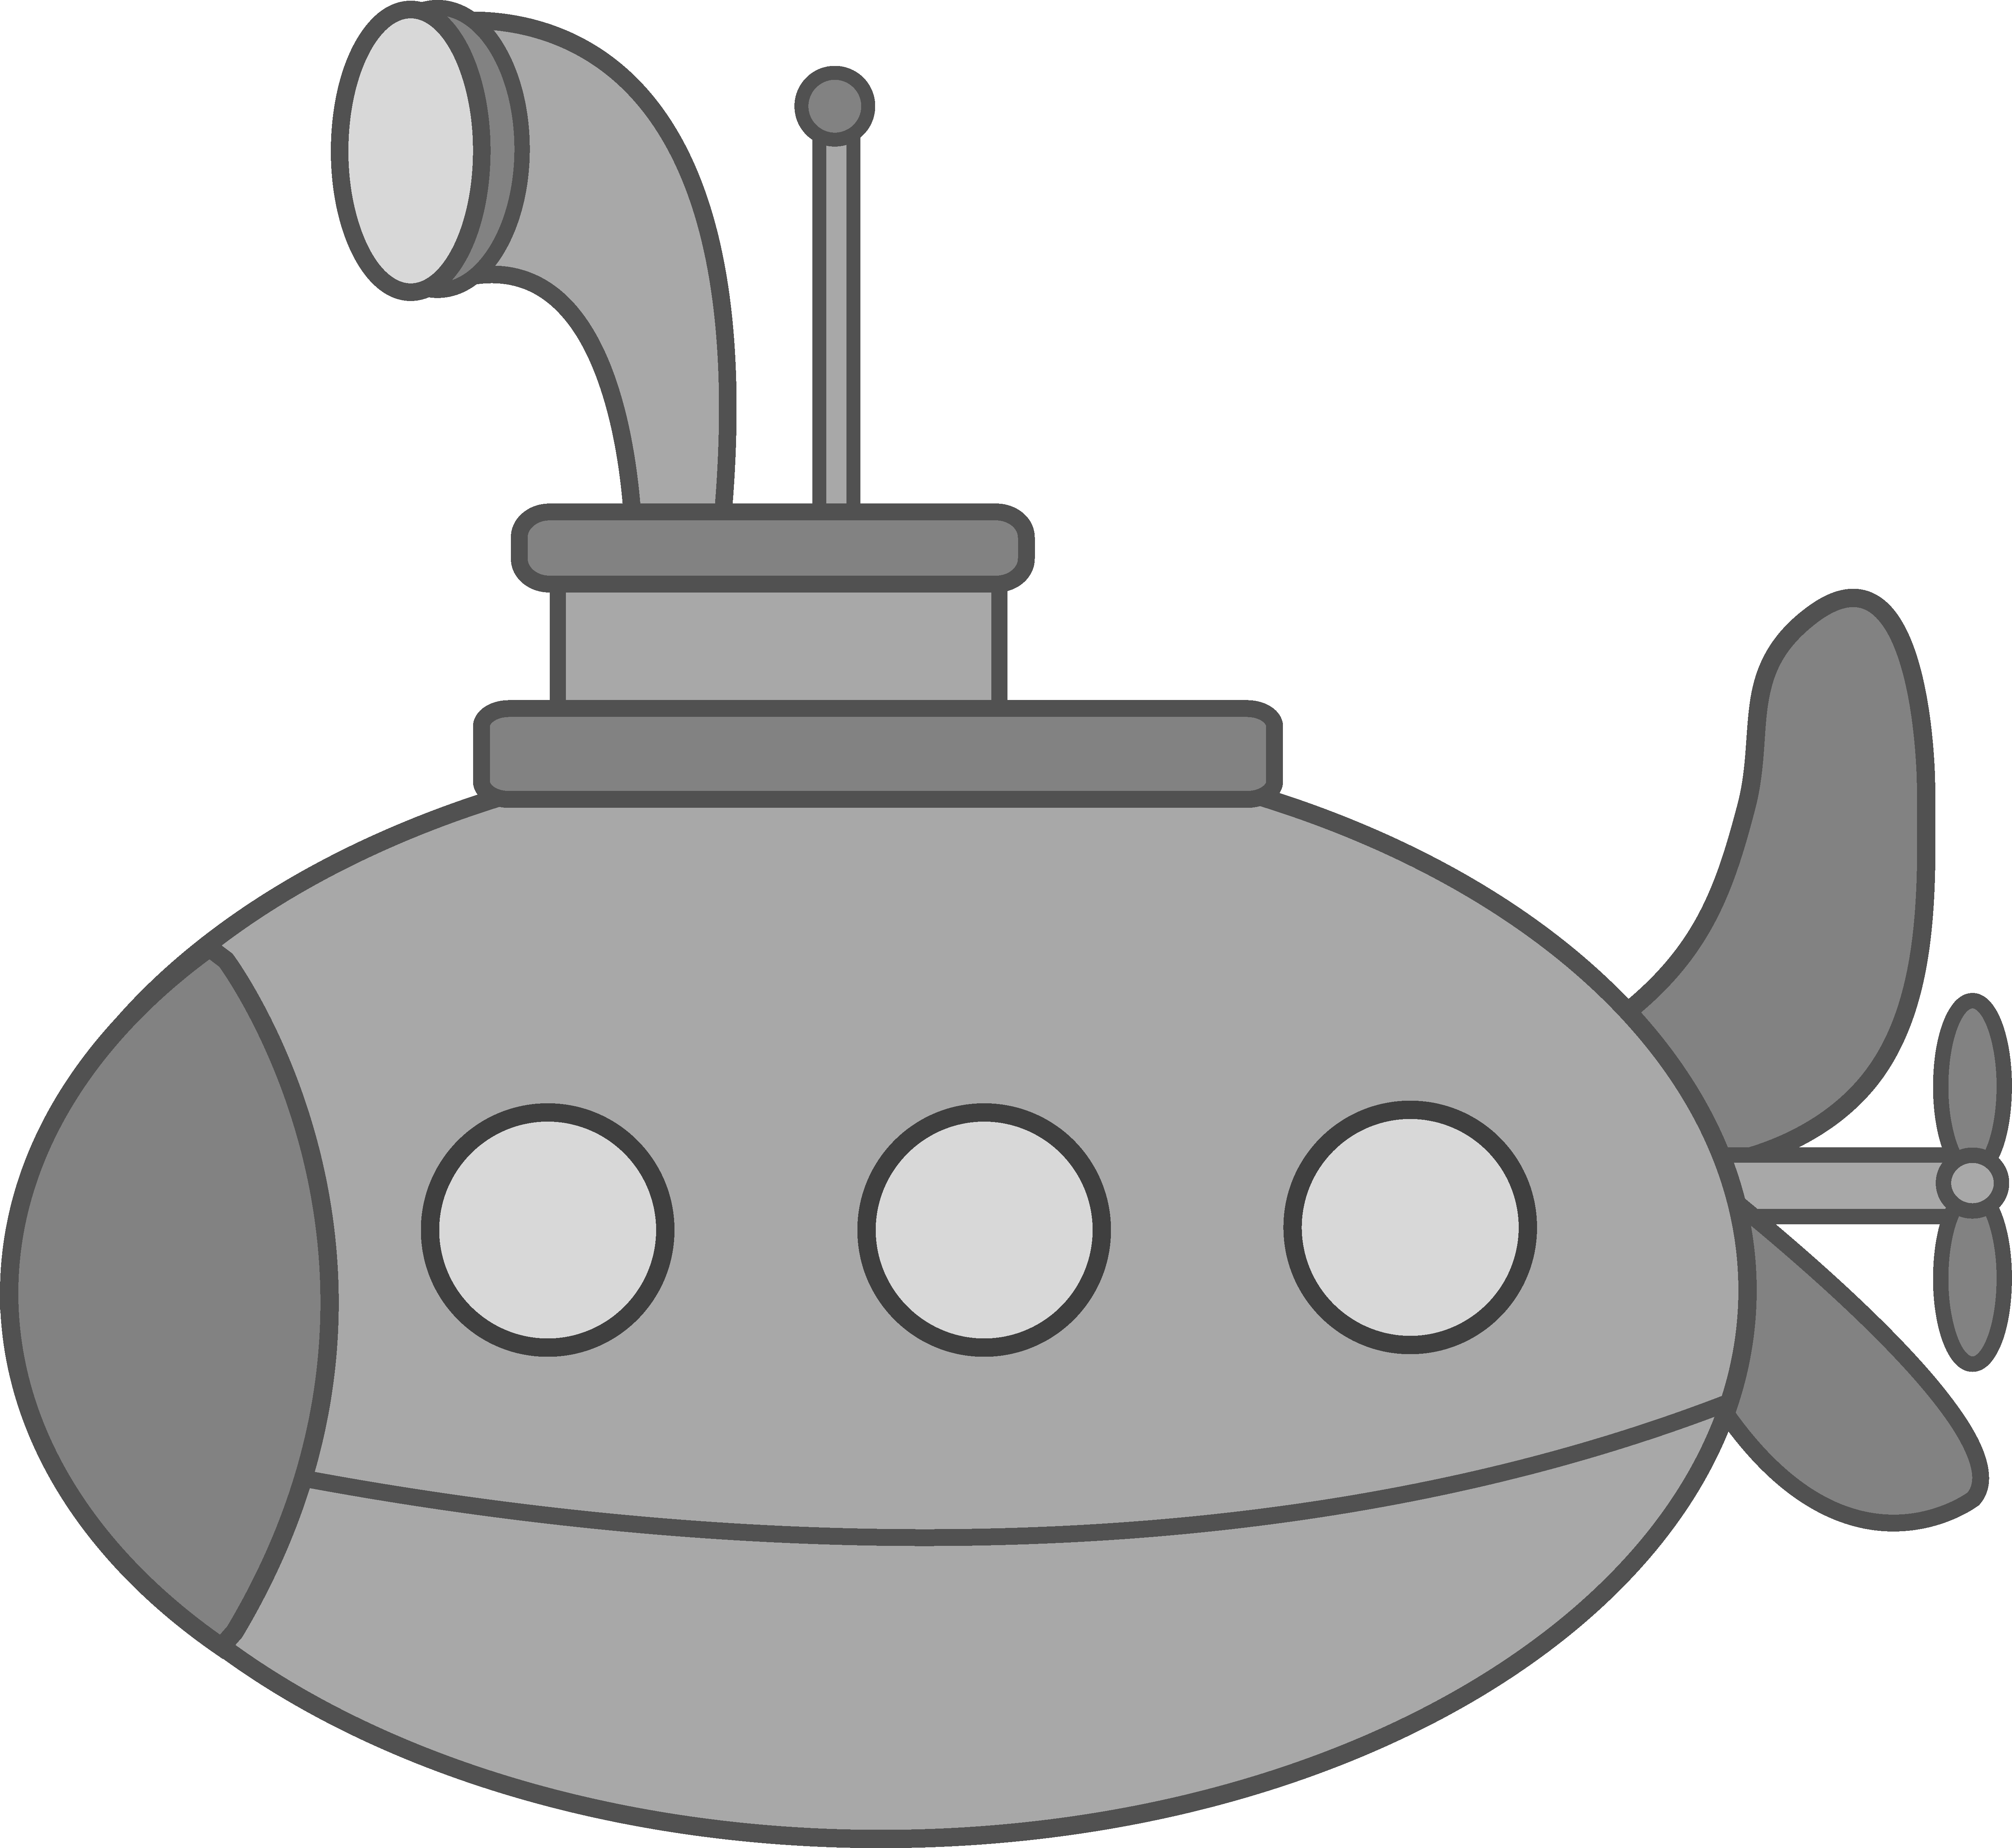 Submarine clipart #18, Download drawings